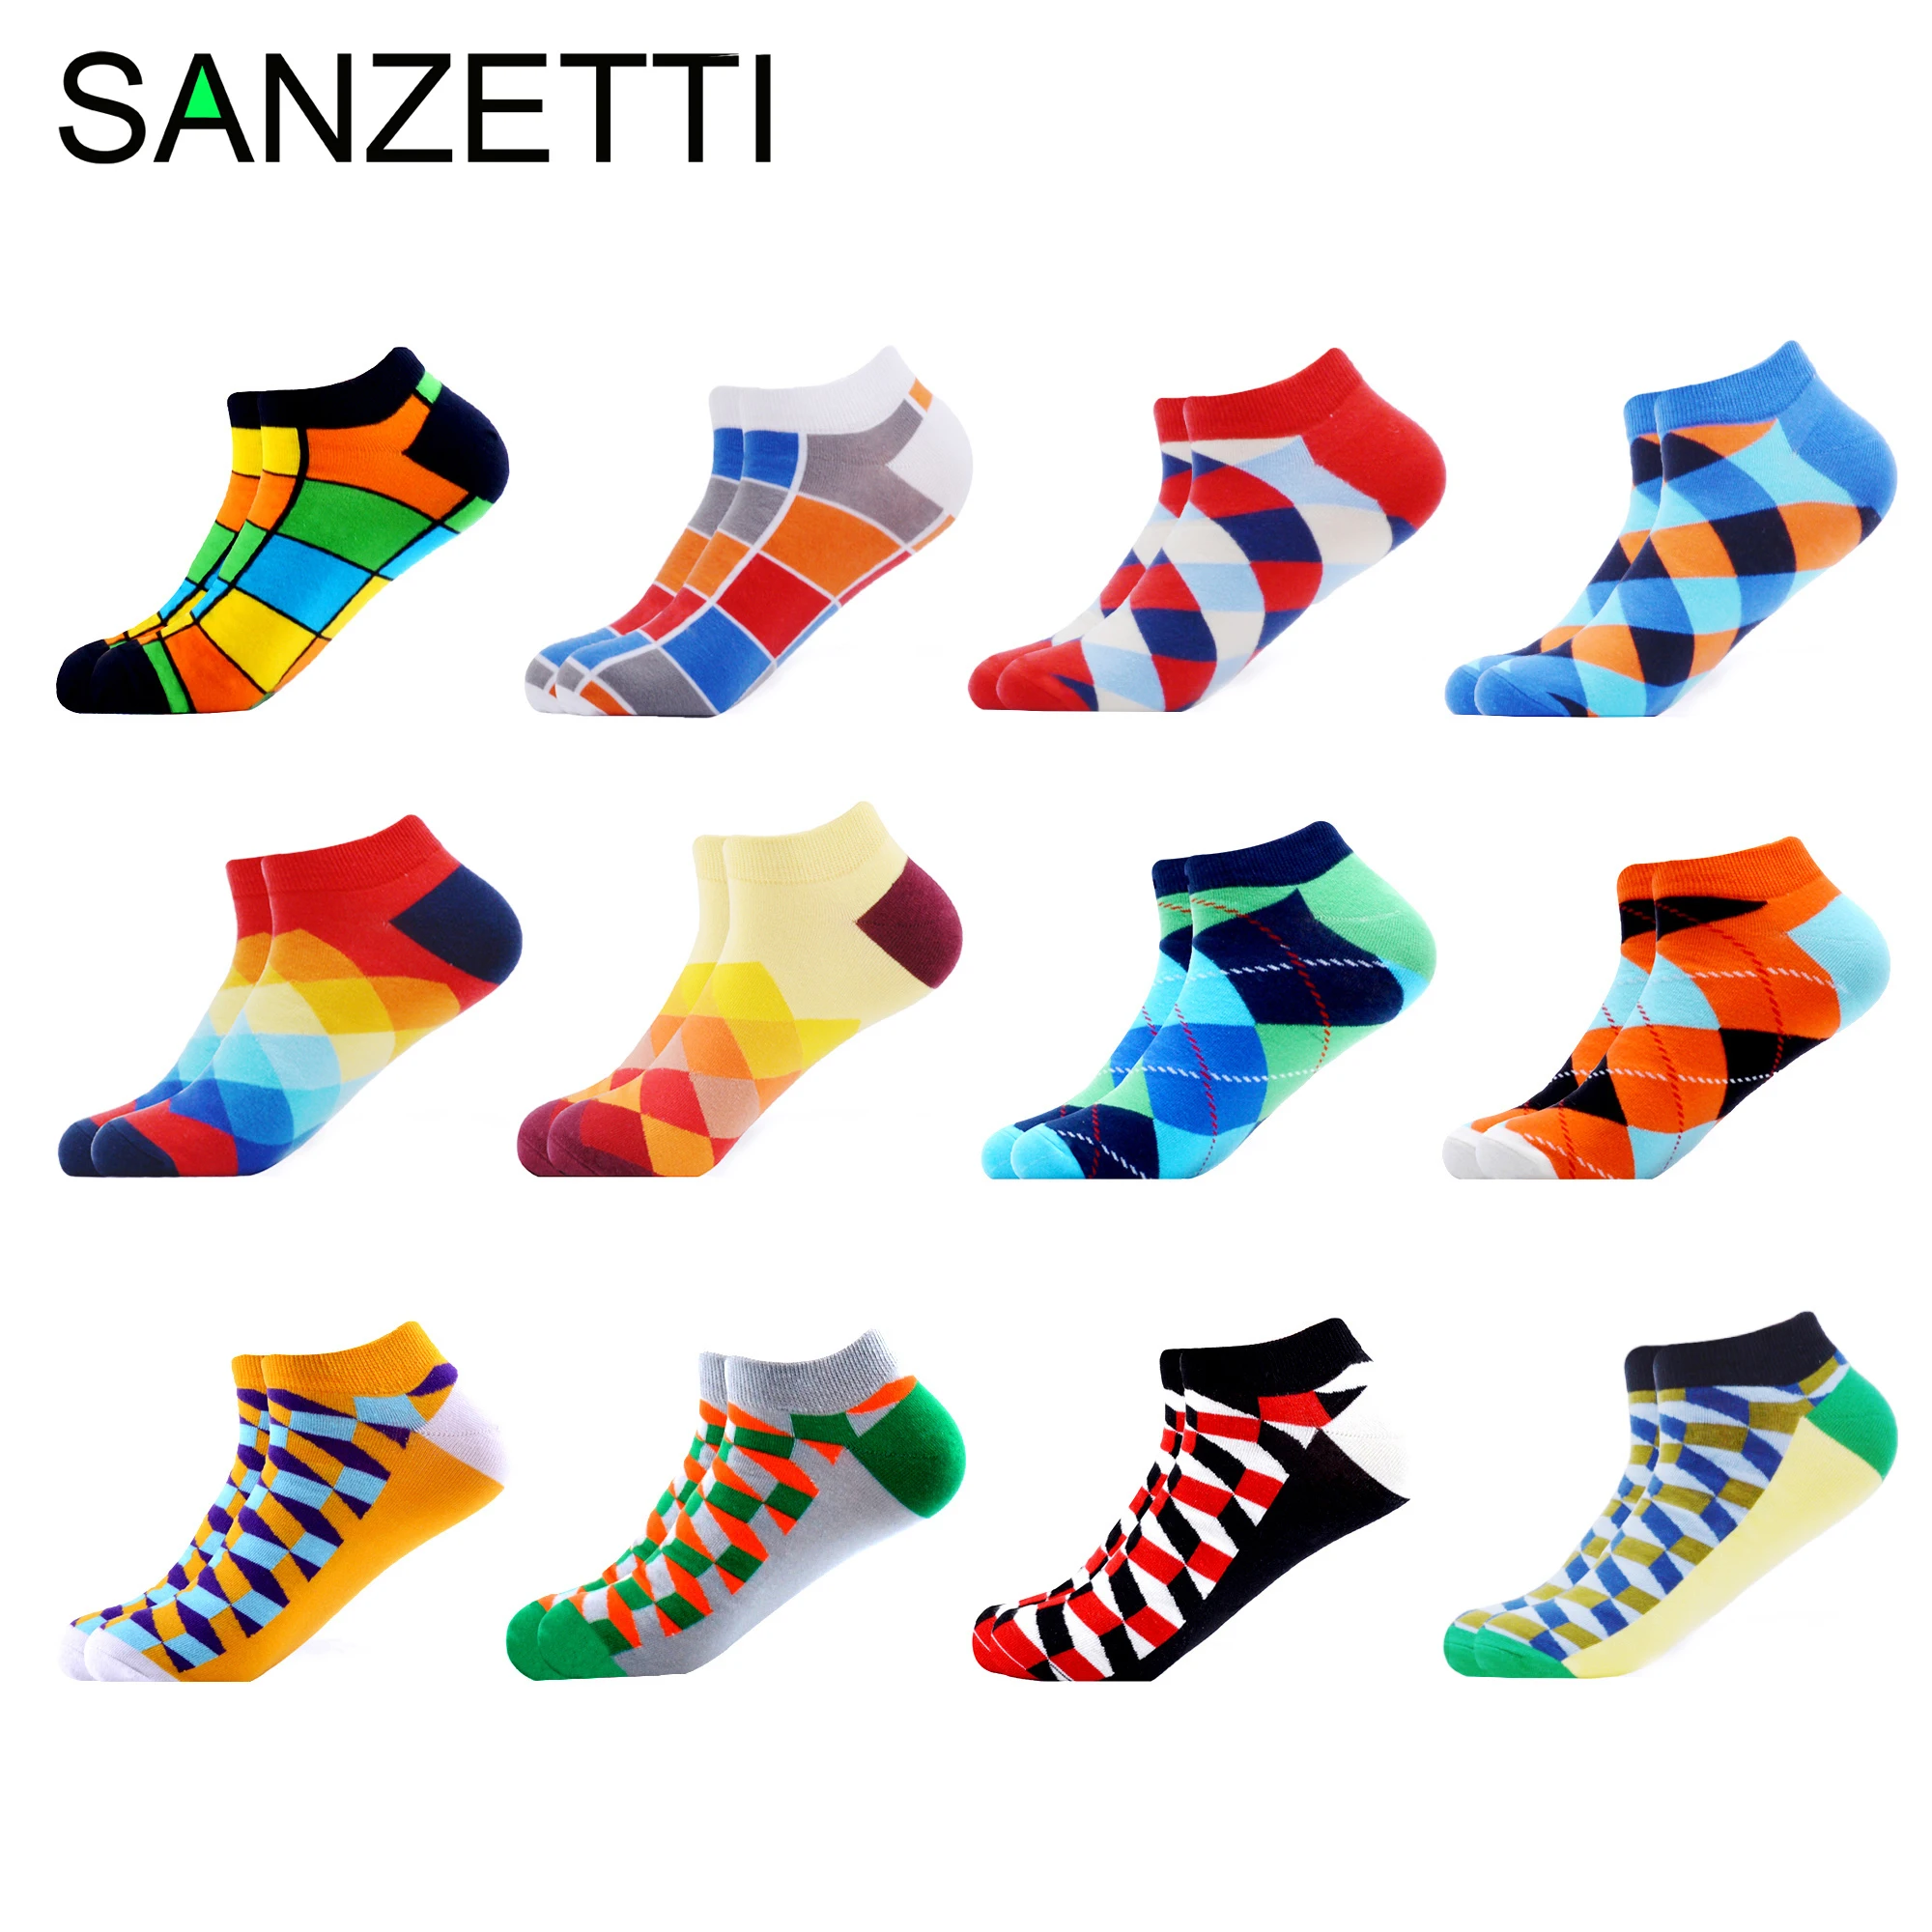 

SANZETTI 6-12 Pairs/Lot Men's Ankle Socks Casual Novelty Colorful Summer Happy Combed Cotton Short Socks Plaid Dress Boat Socks